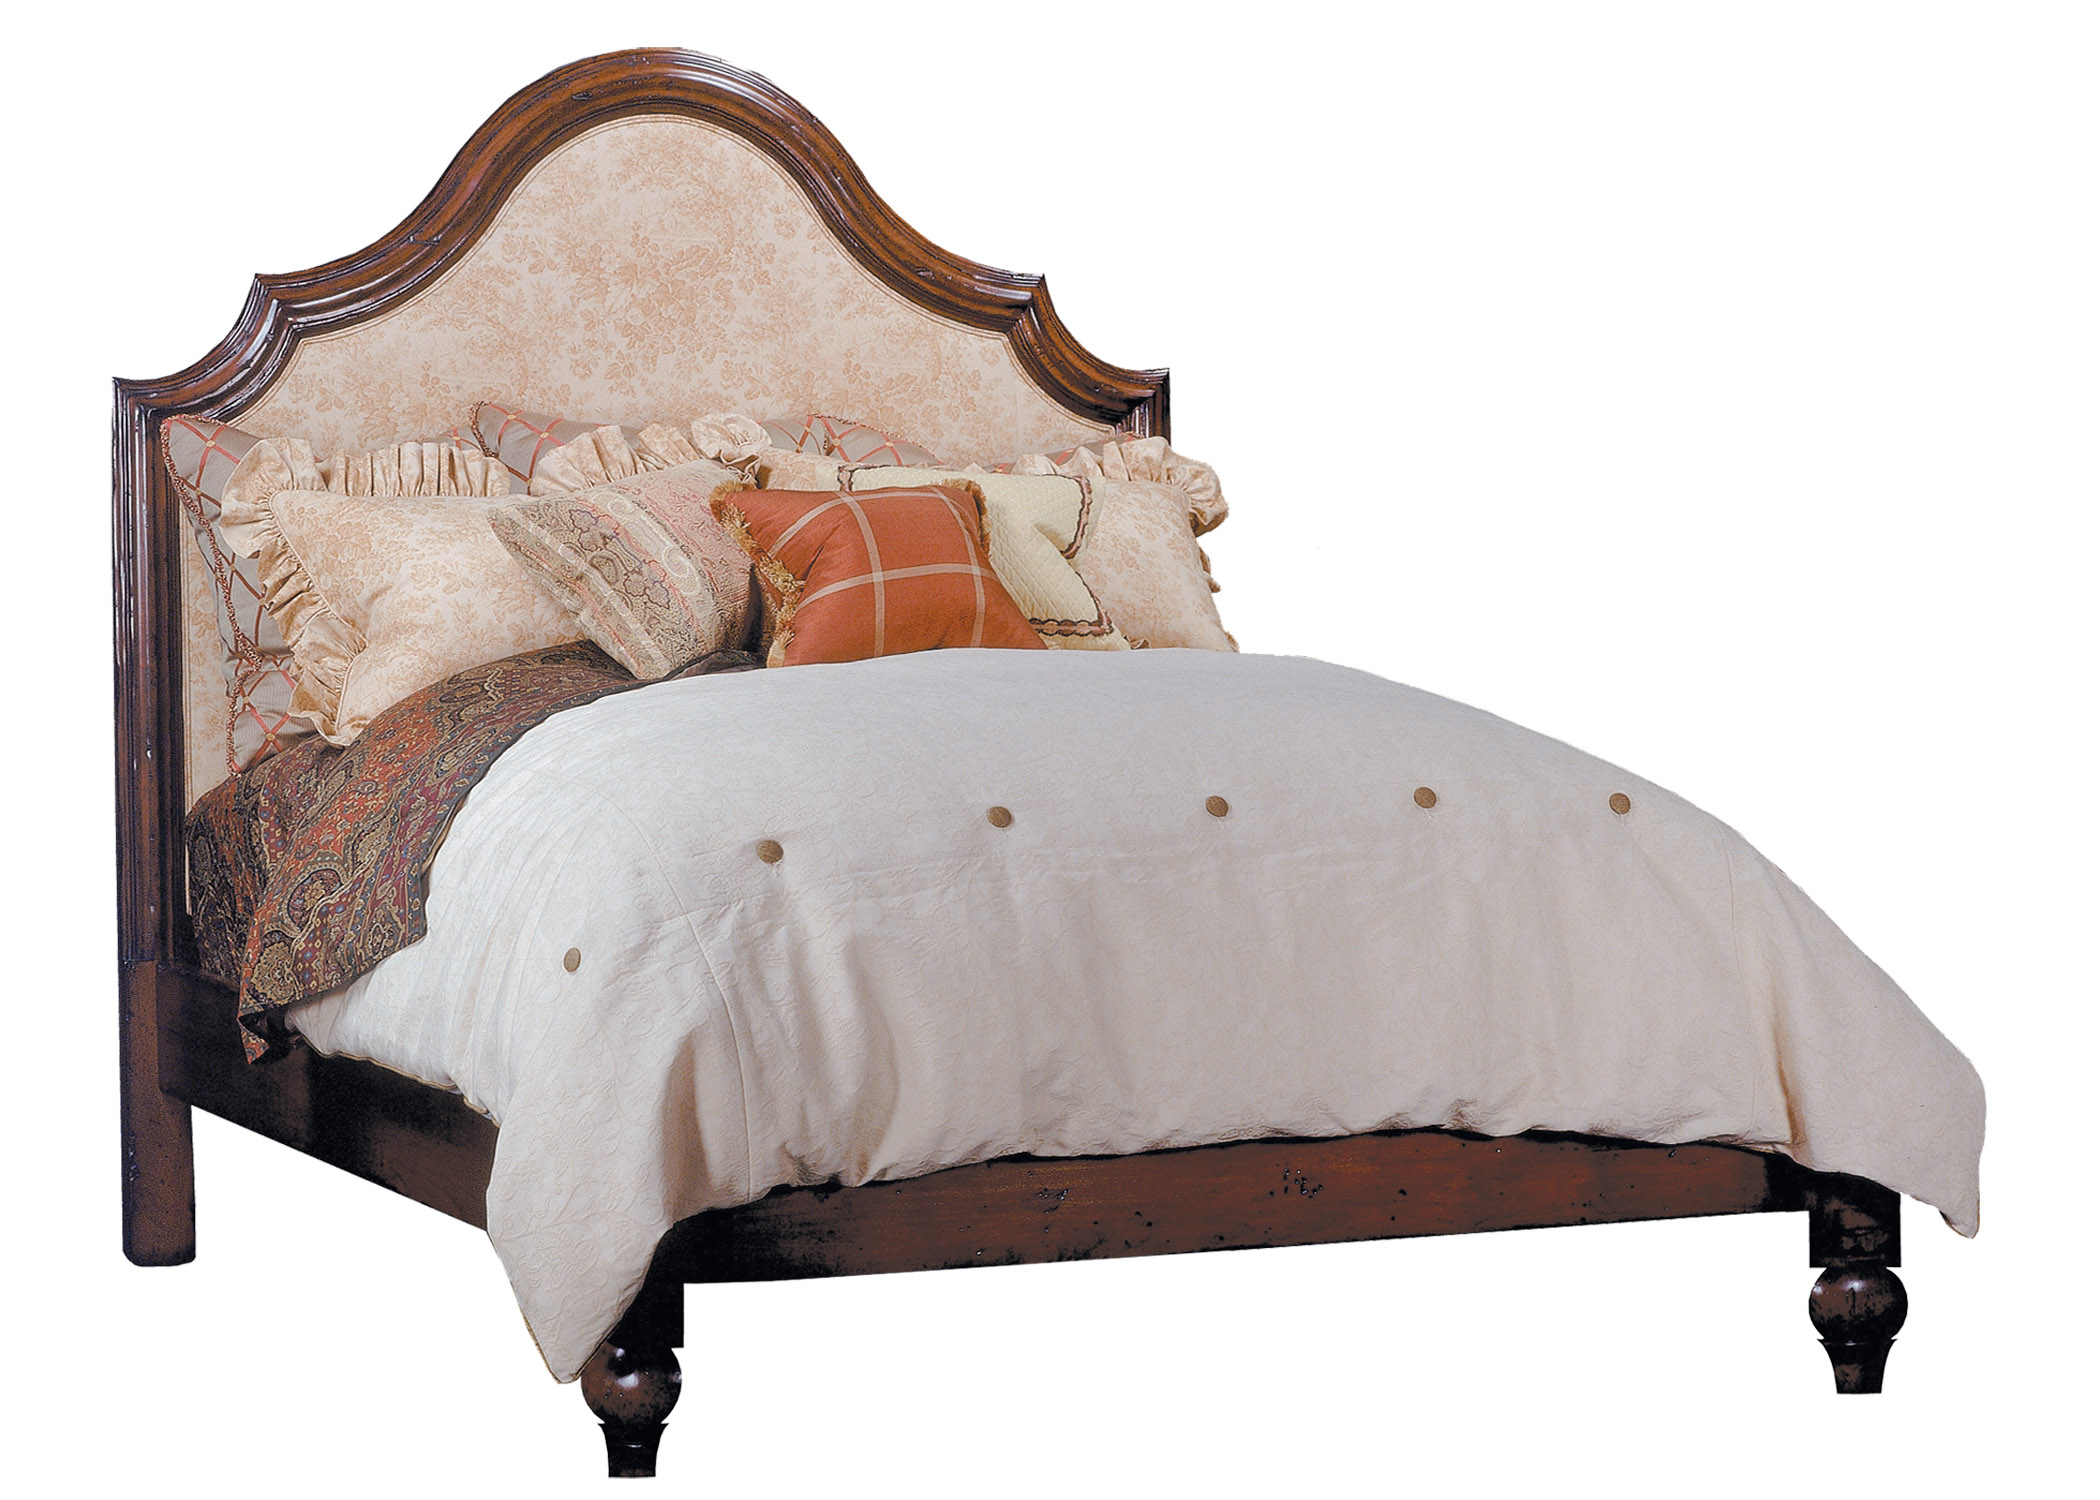 Andre transitional traditional upholstered headboard queen bed by Woodland furniture in Idaho Falls